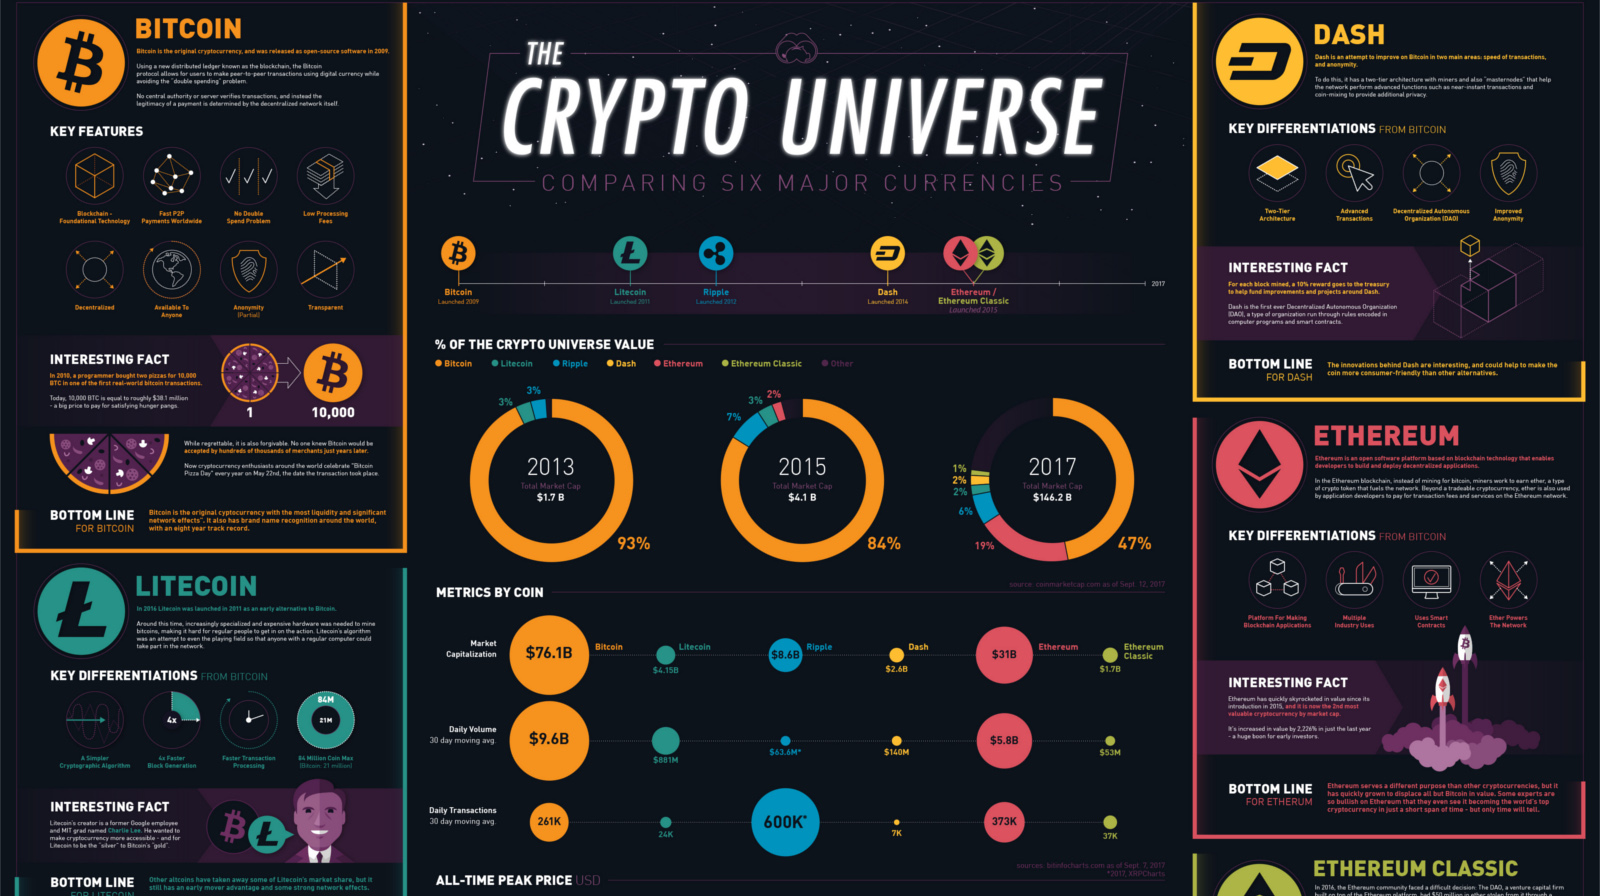 This Giant Infographic Compares Bitcoin, Ethereum, and ...